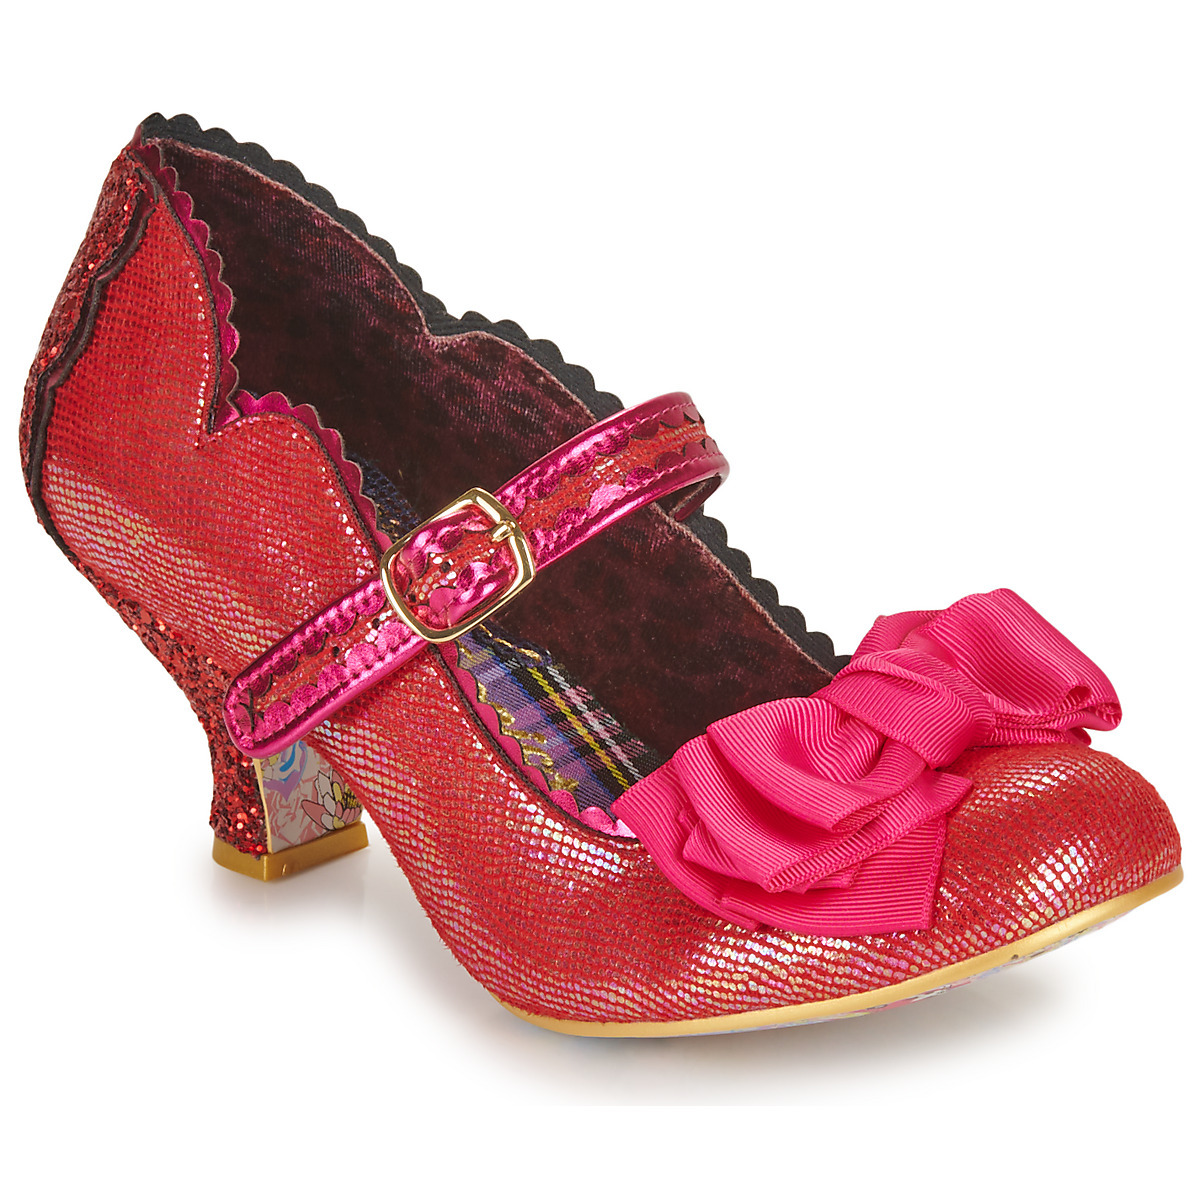 Spartoo Women's Ankle Boots in Red from Irregular Choice GOOFASH